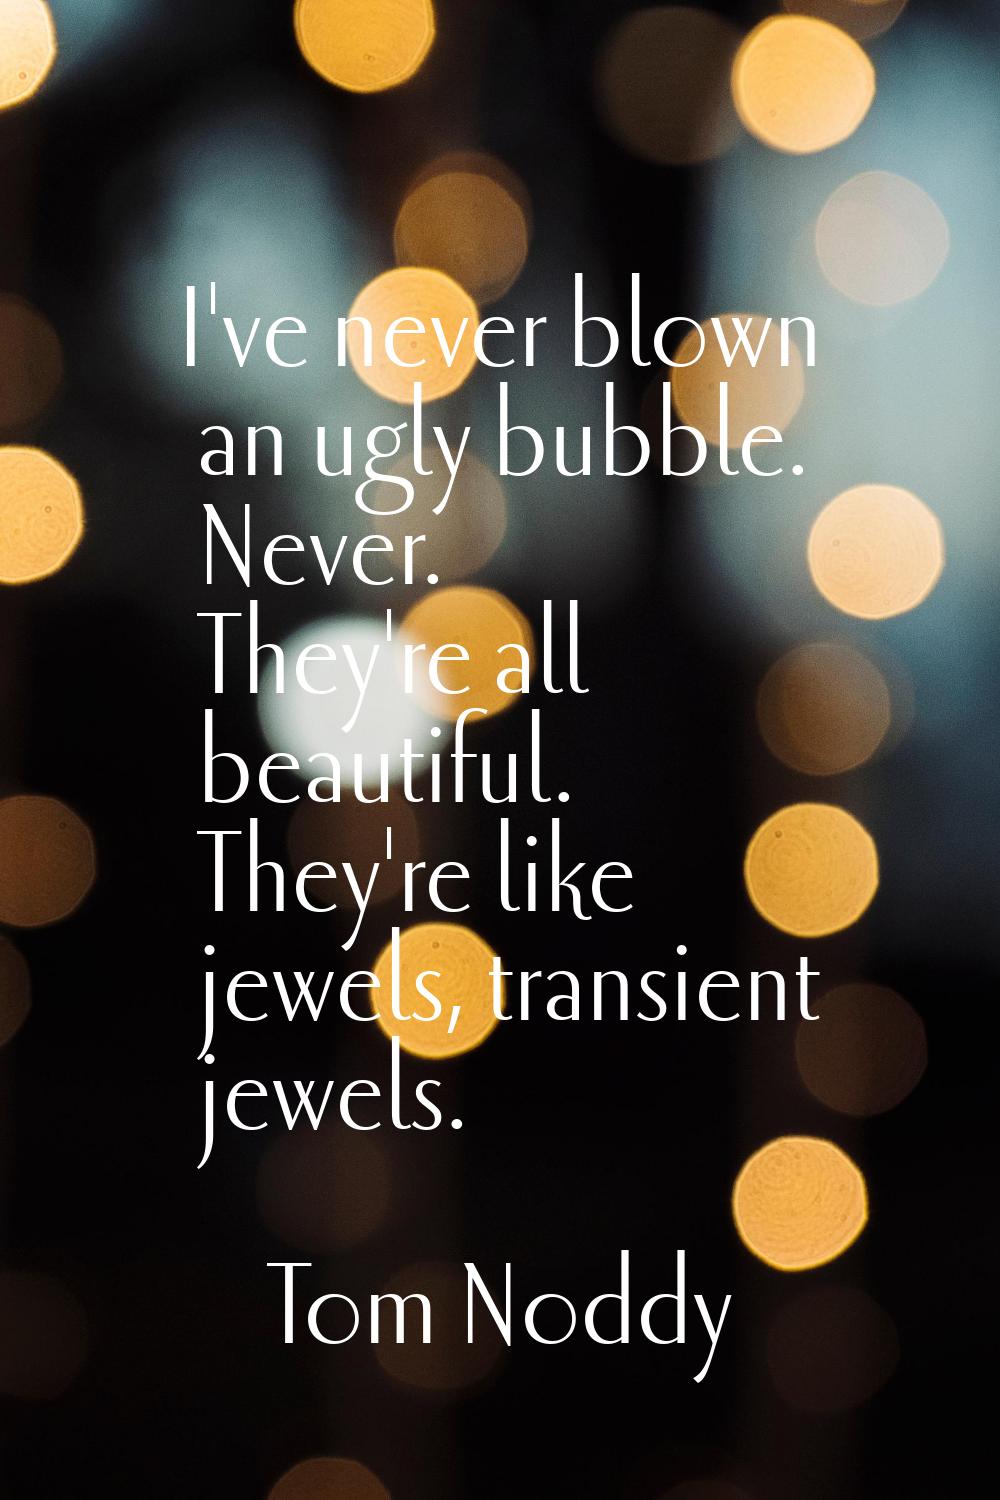 I've never blown an ugly bubble. Never. They're all beautiful. They're like jewels, transient jewel